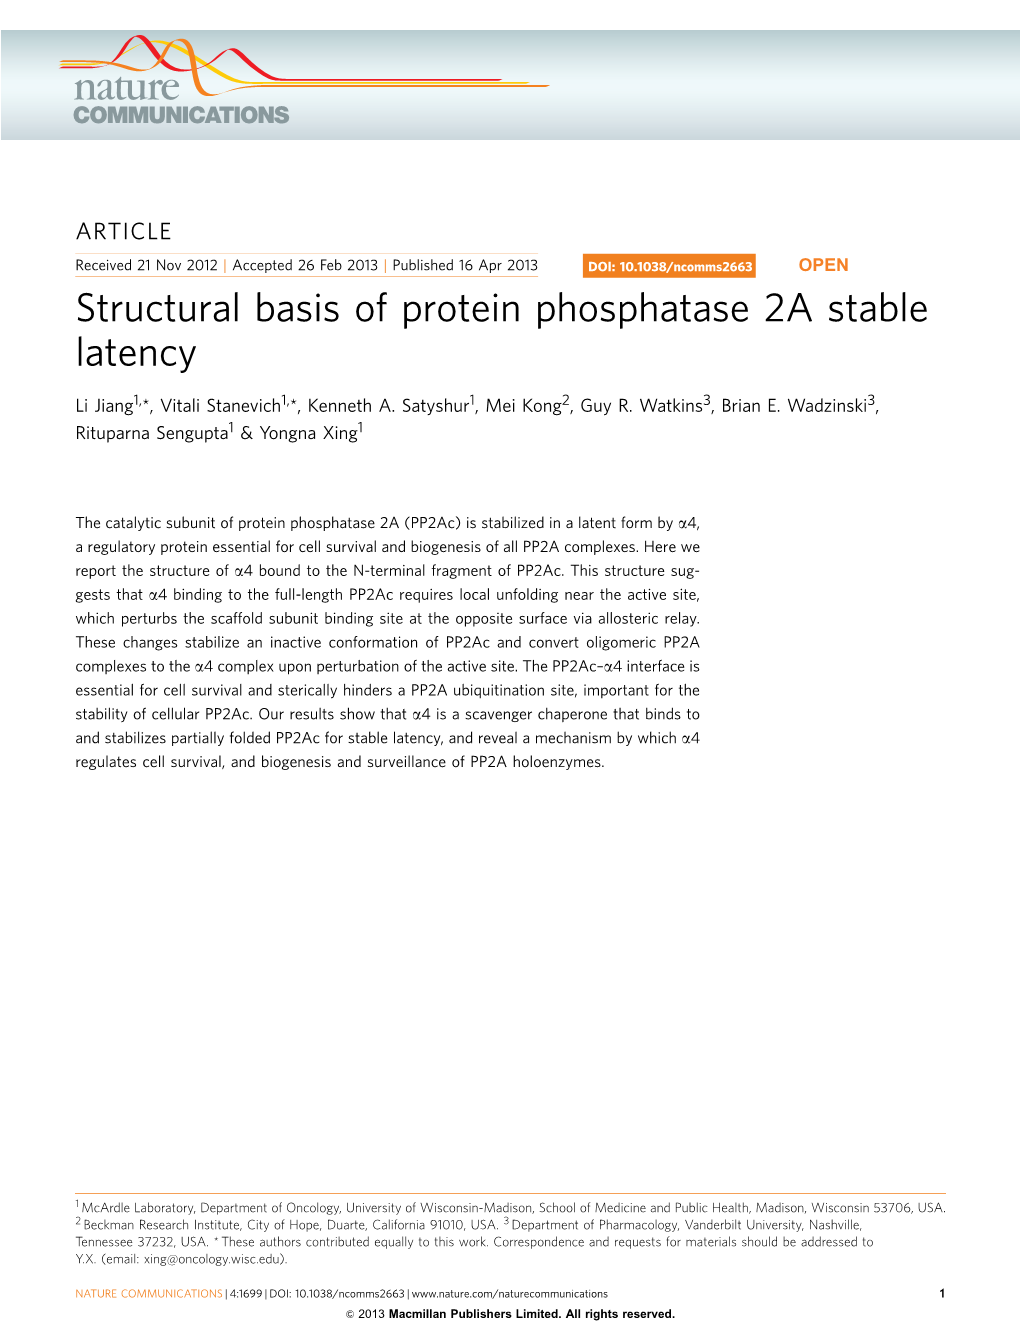 Structural Basis of Protein Phosphatase 2A Stable Latency